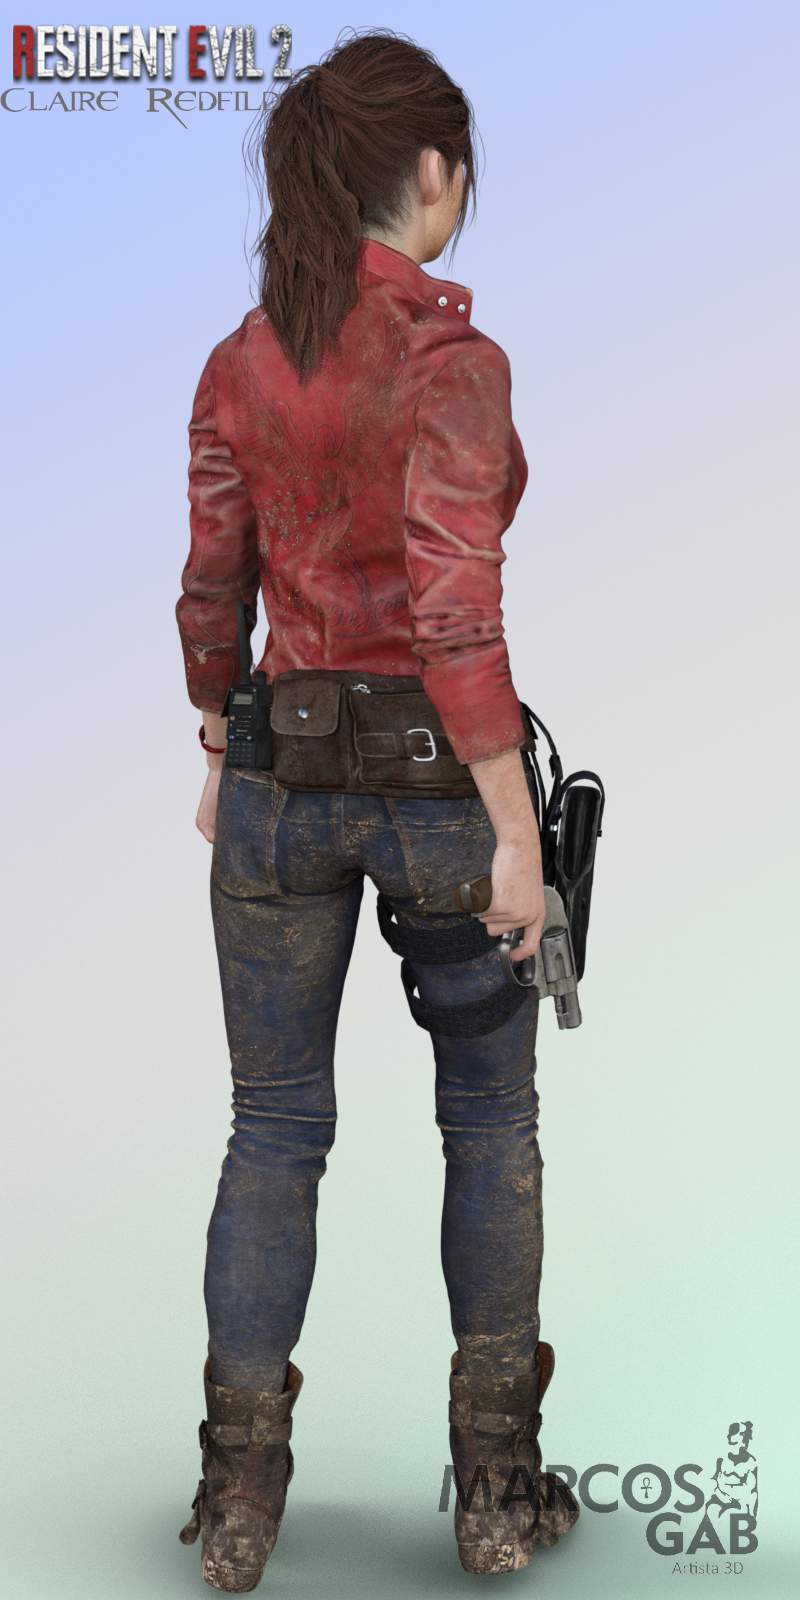 REV2 Claire Redfield for G9  3d Models for Daz Studio and Poser